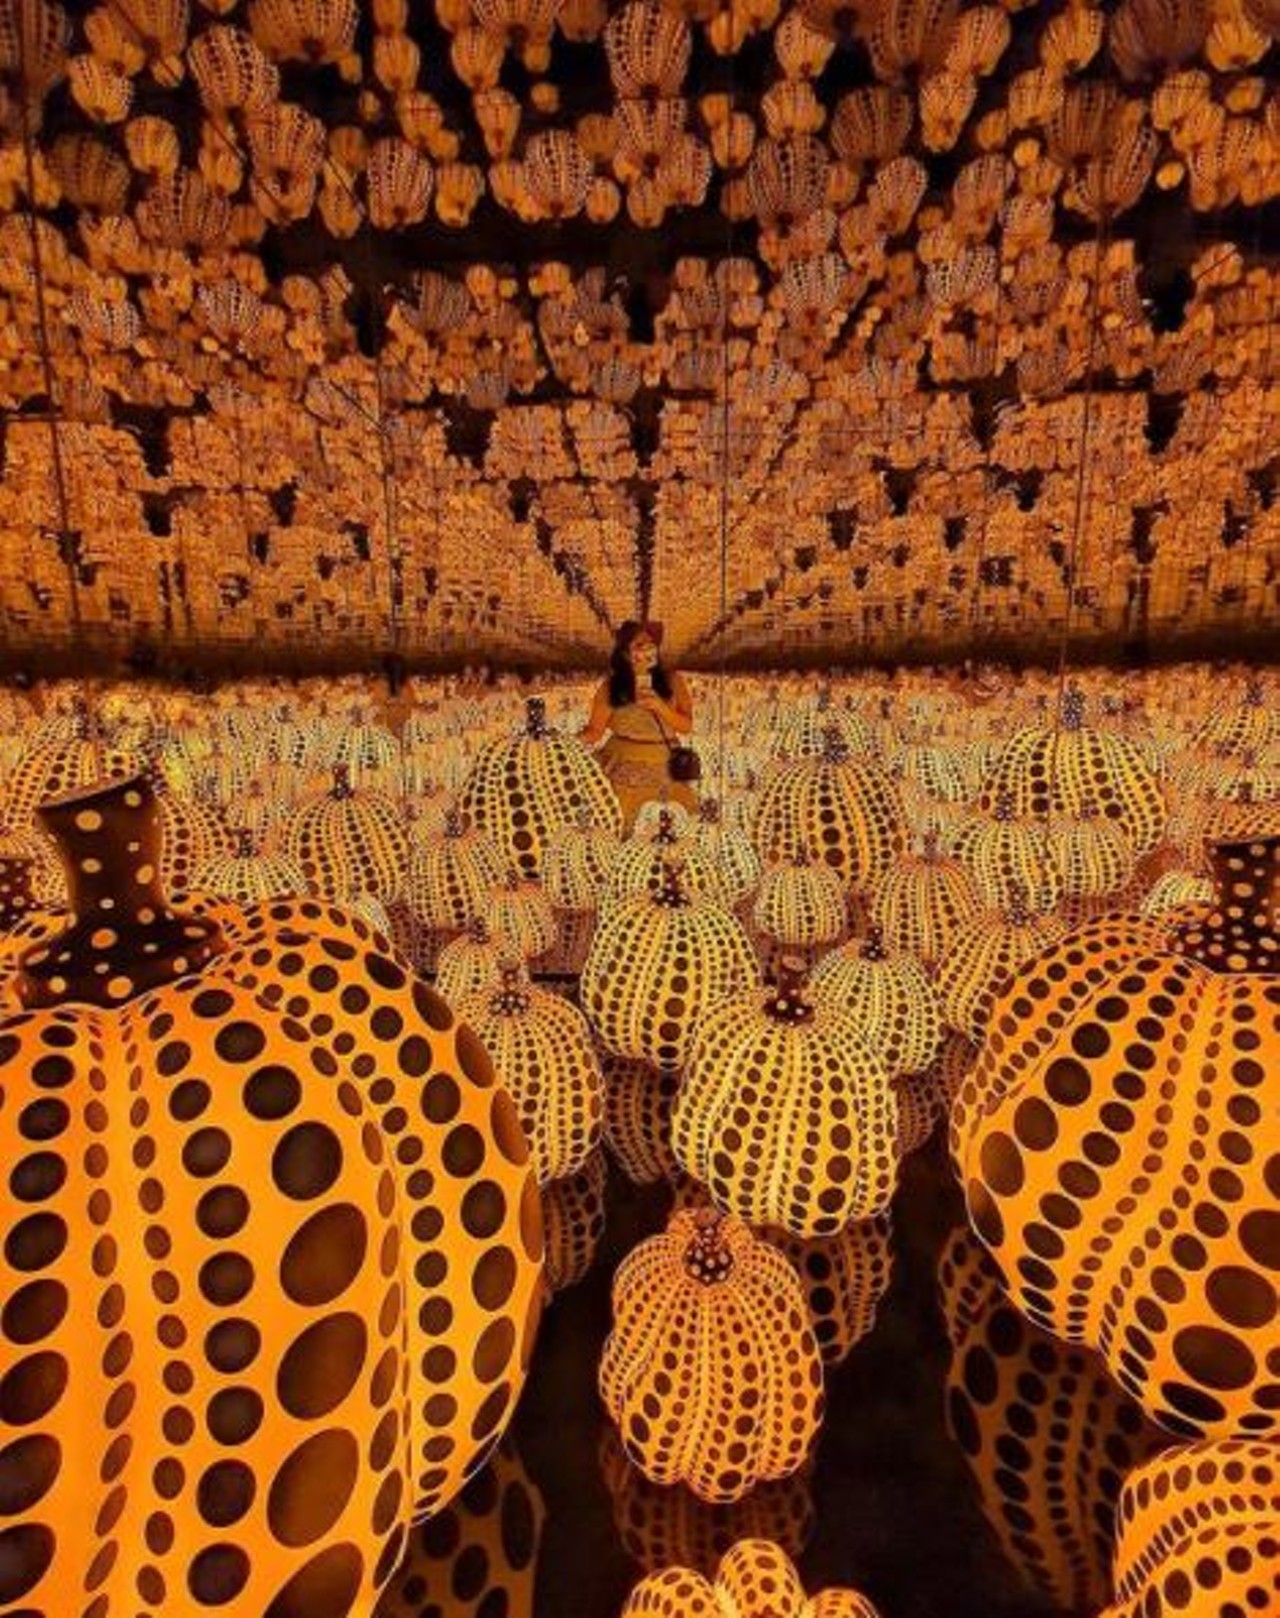 Get lost among works of art at the McNay
6000 N New Braunfels Ave, (210) 824-5368, mcnayart.org
Thursday afternoons and the first Sunday of every month offer free admission. While you’re there, be sure to check out Yayoi Kusama’s signature infinity mirror room, a part of the museum’s “Limitless!” exhibition running until September 19.
Photo via Instagram / motherofgastronomy